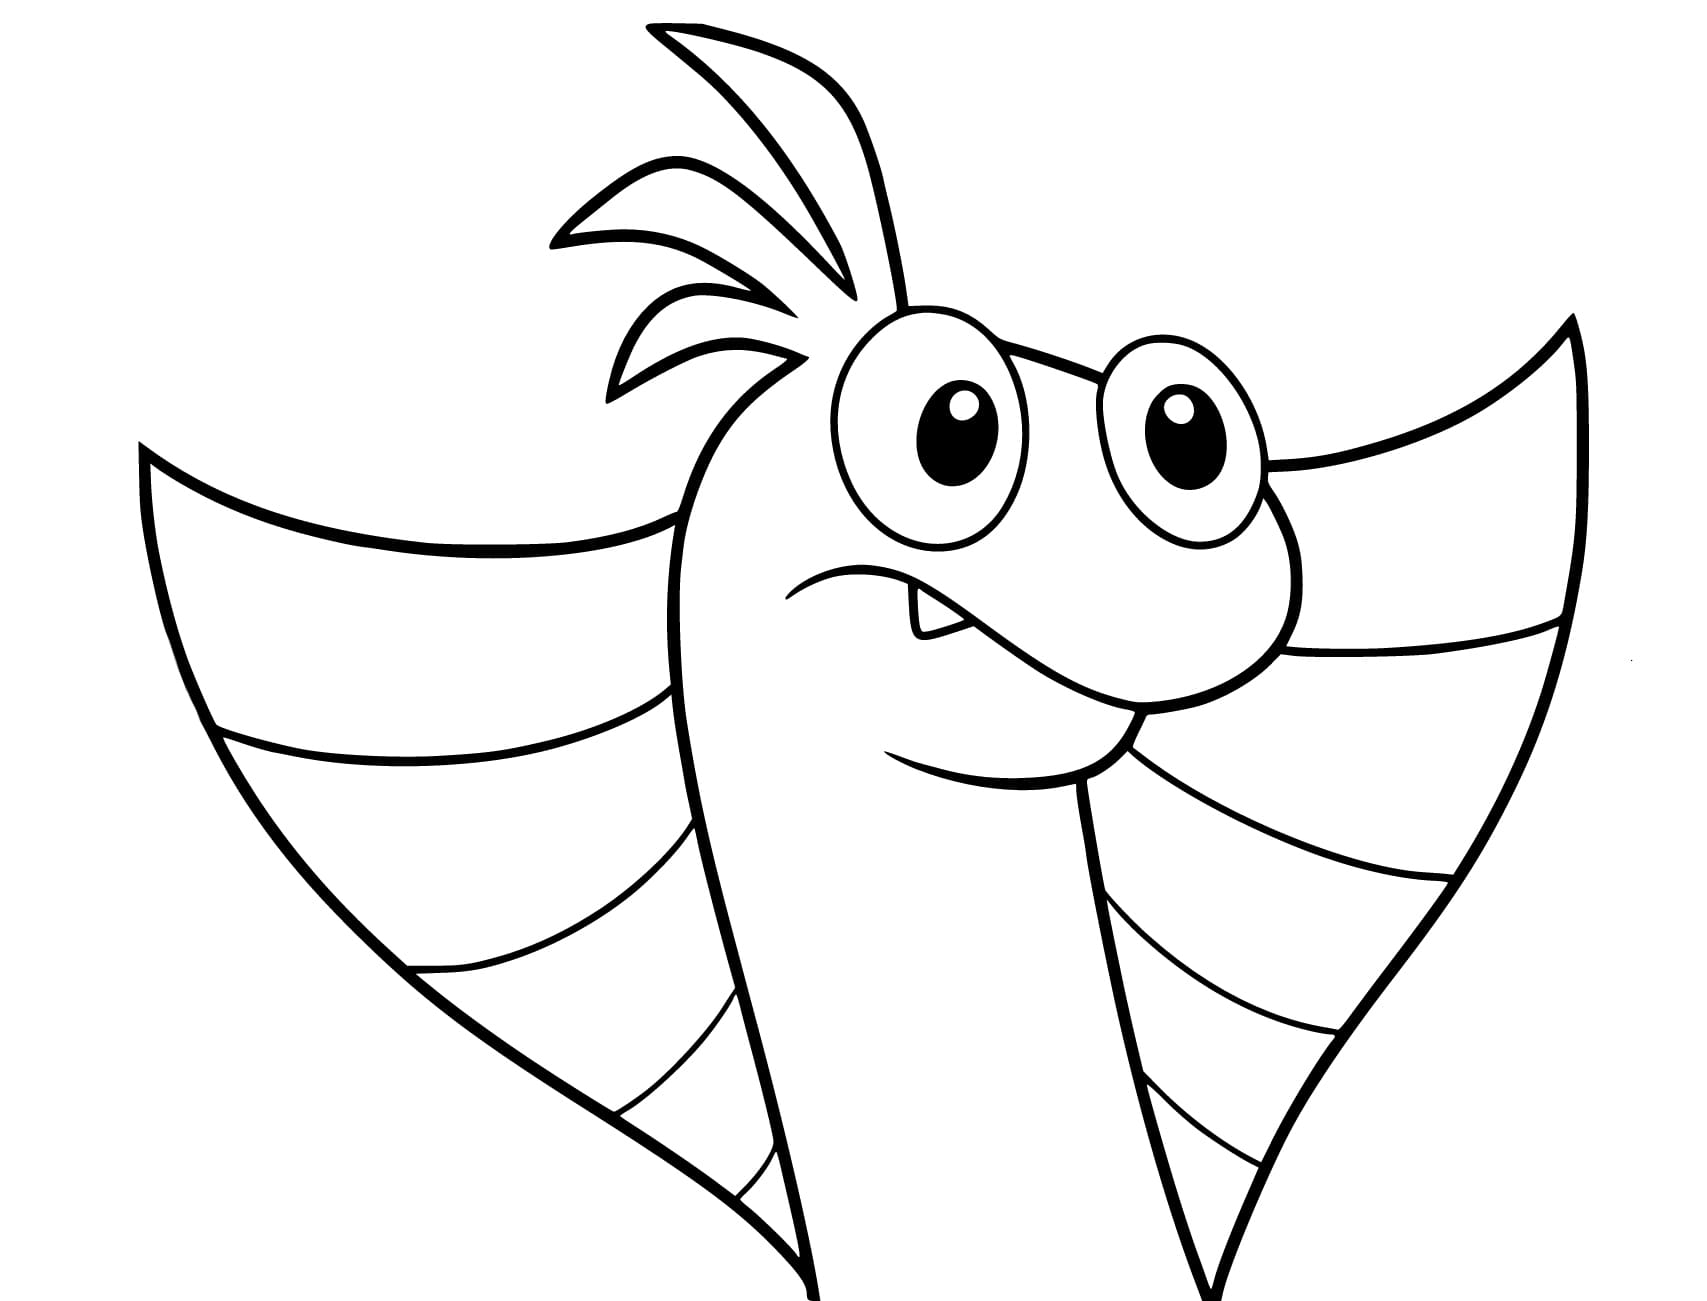 Cute Silent Steve coloring page - Download, Print or Color Online for Free